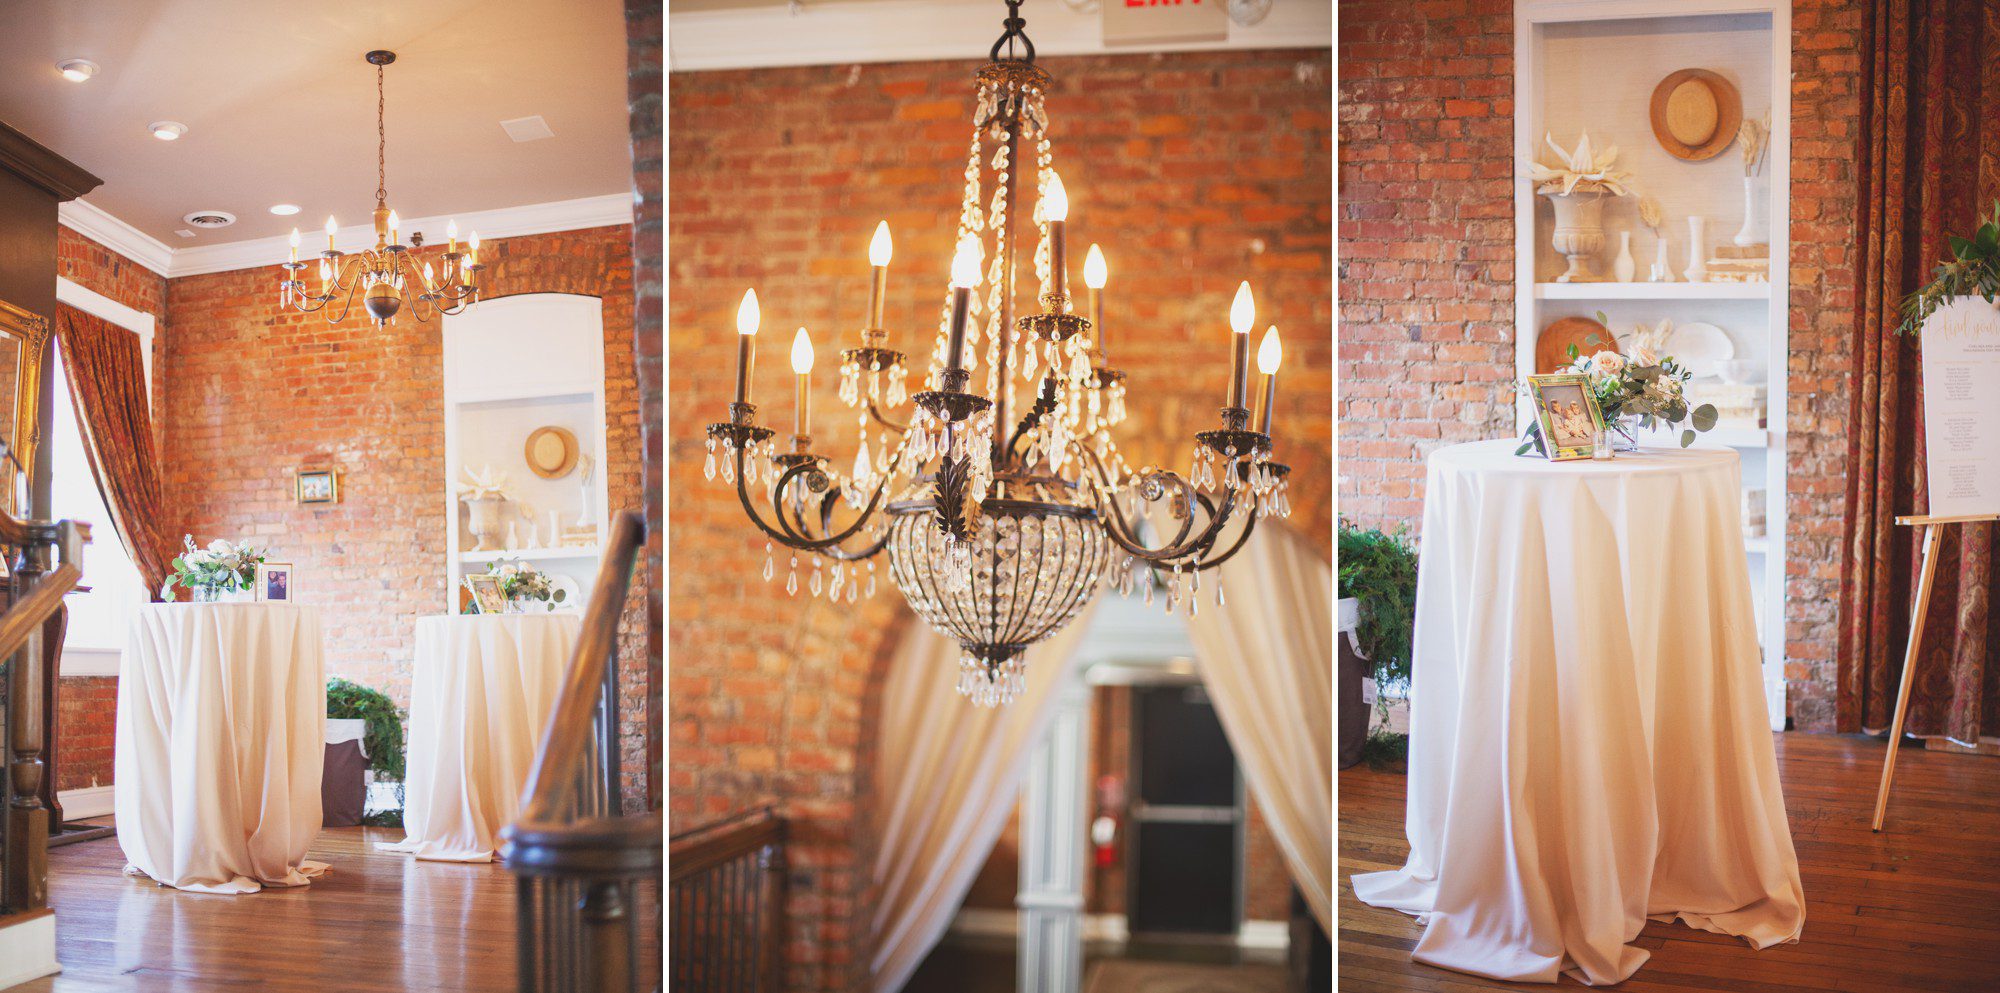 Gorgeous wedding details including chandelier and drapings at McConnell House in Franklin, TN before wedding ceremony. Photos by Krista Lee Photography Nashville, TN